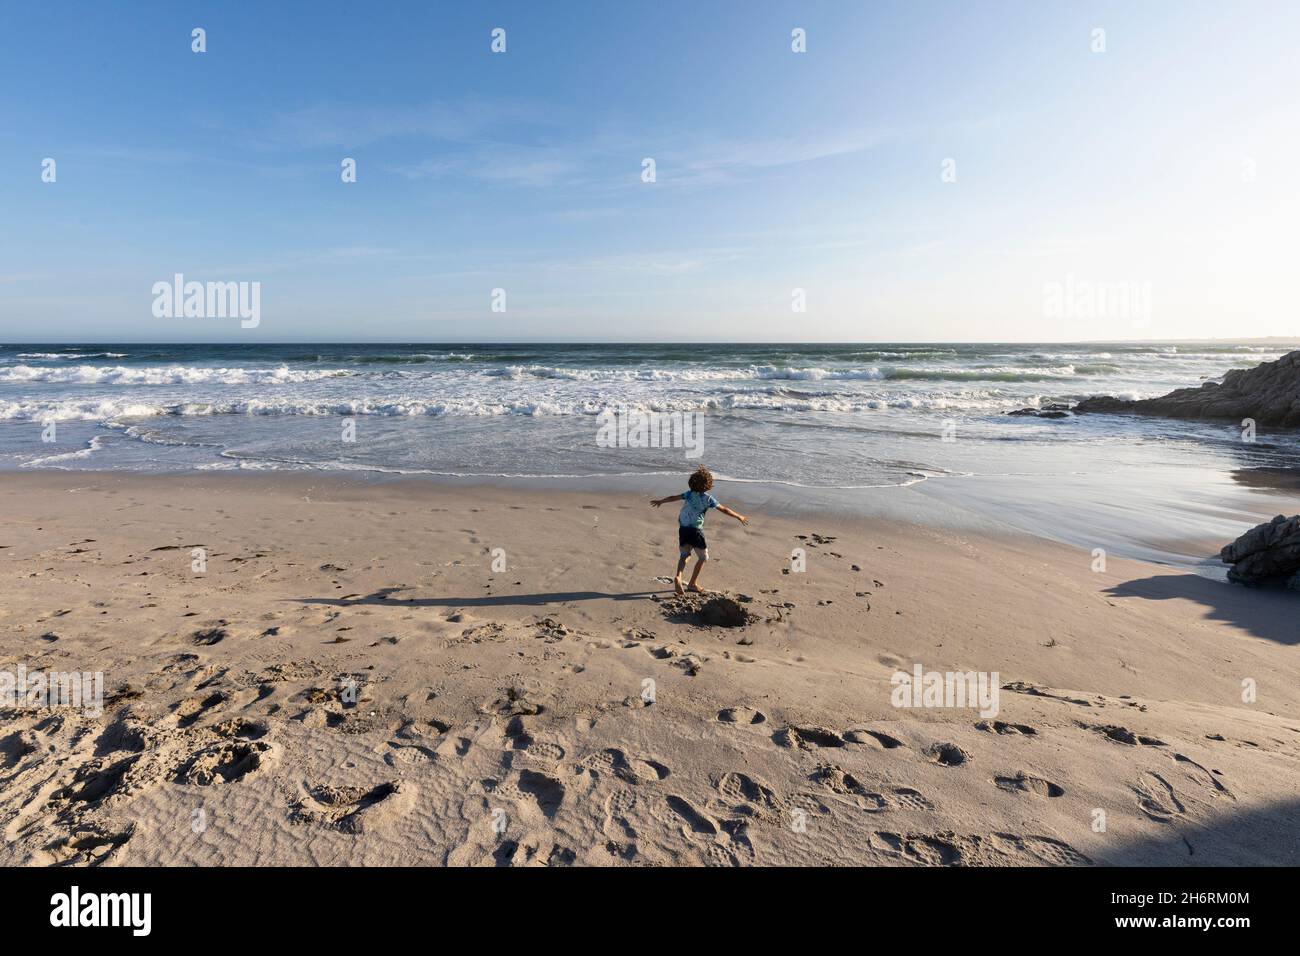 Young boy running in open space on a beach on the Atlantic coast. Stock Photo